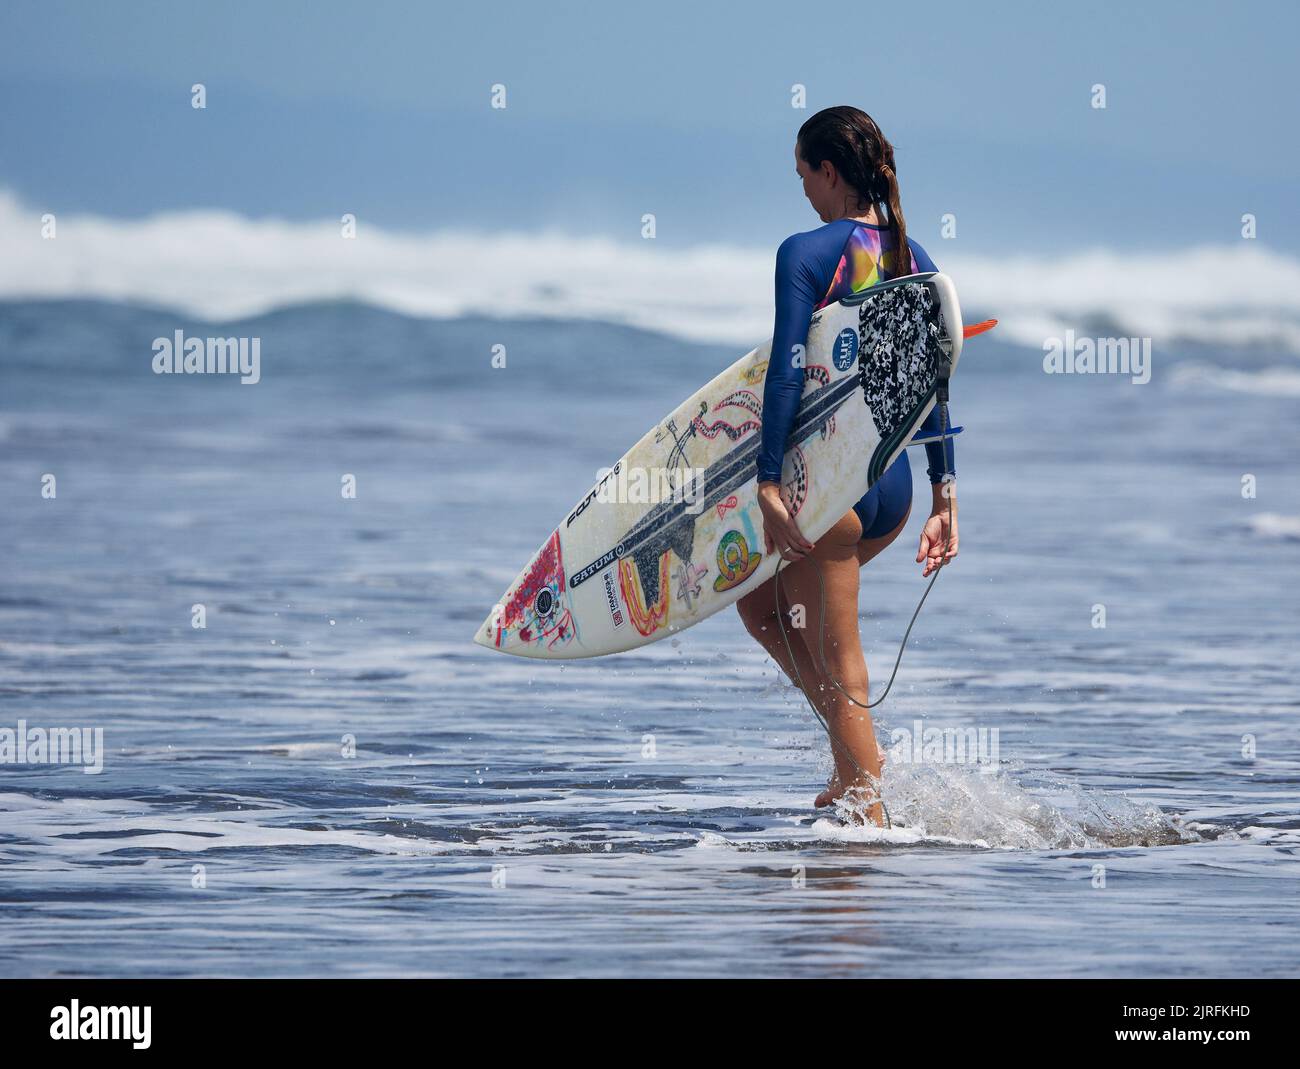 A surfer on the beach of Playa Hermosa in Costa Rica Stock Photo